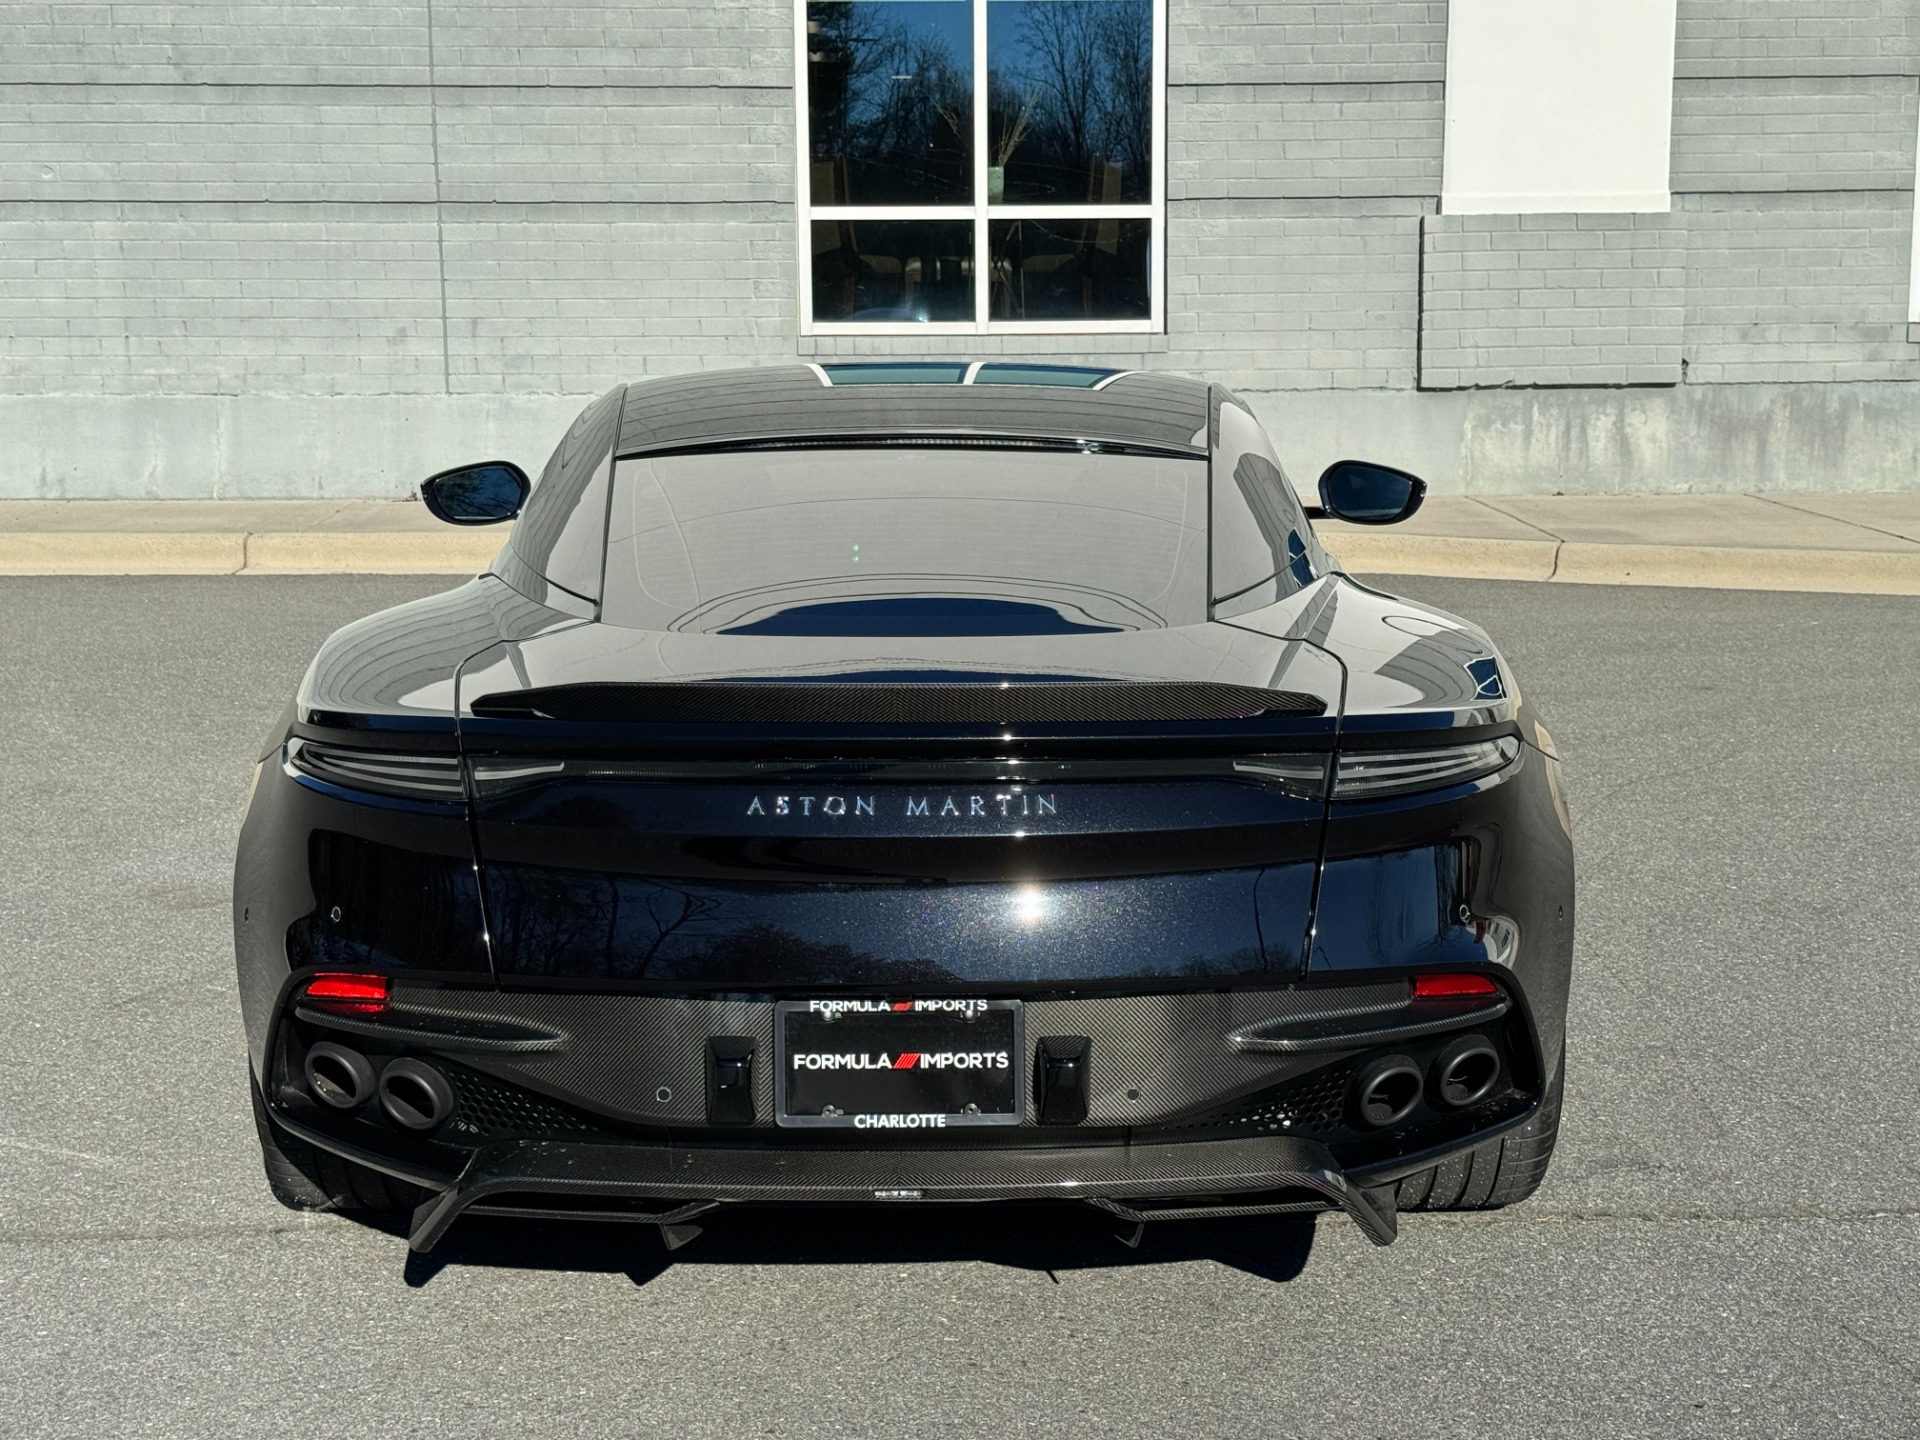 Used 2020 Aston Martin DBS SUPERLEGGERA / CARBON FIBER / V12 750HP / ACCENT STITCHING for sale $240,000 at Formula Imports in Charlotte NC 28227 10